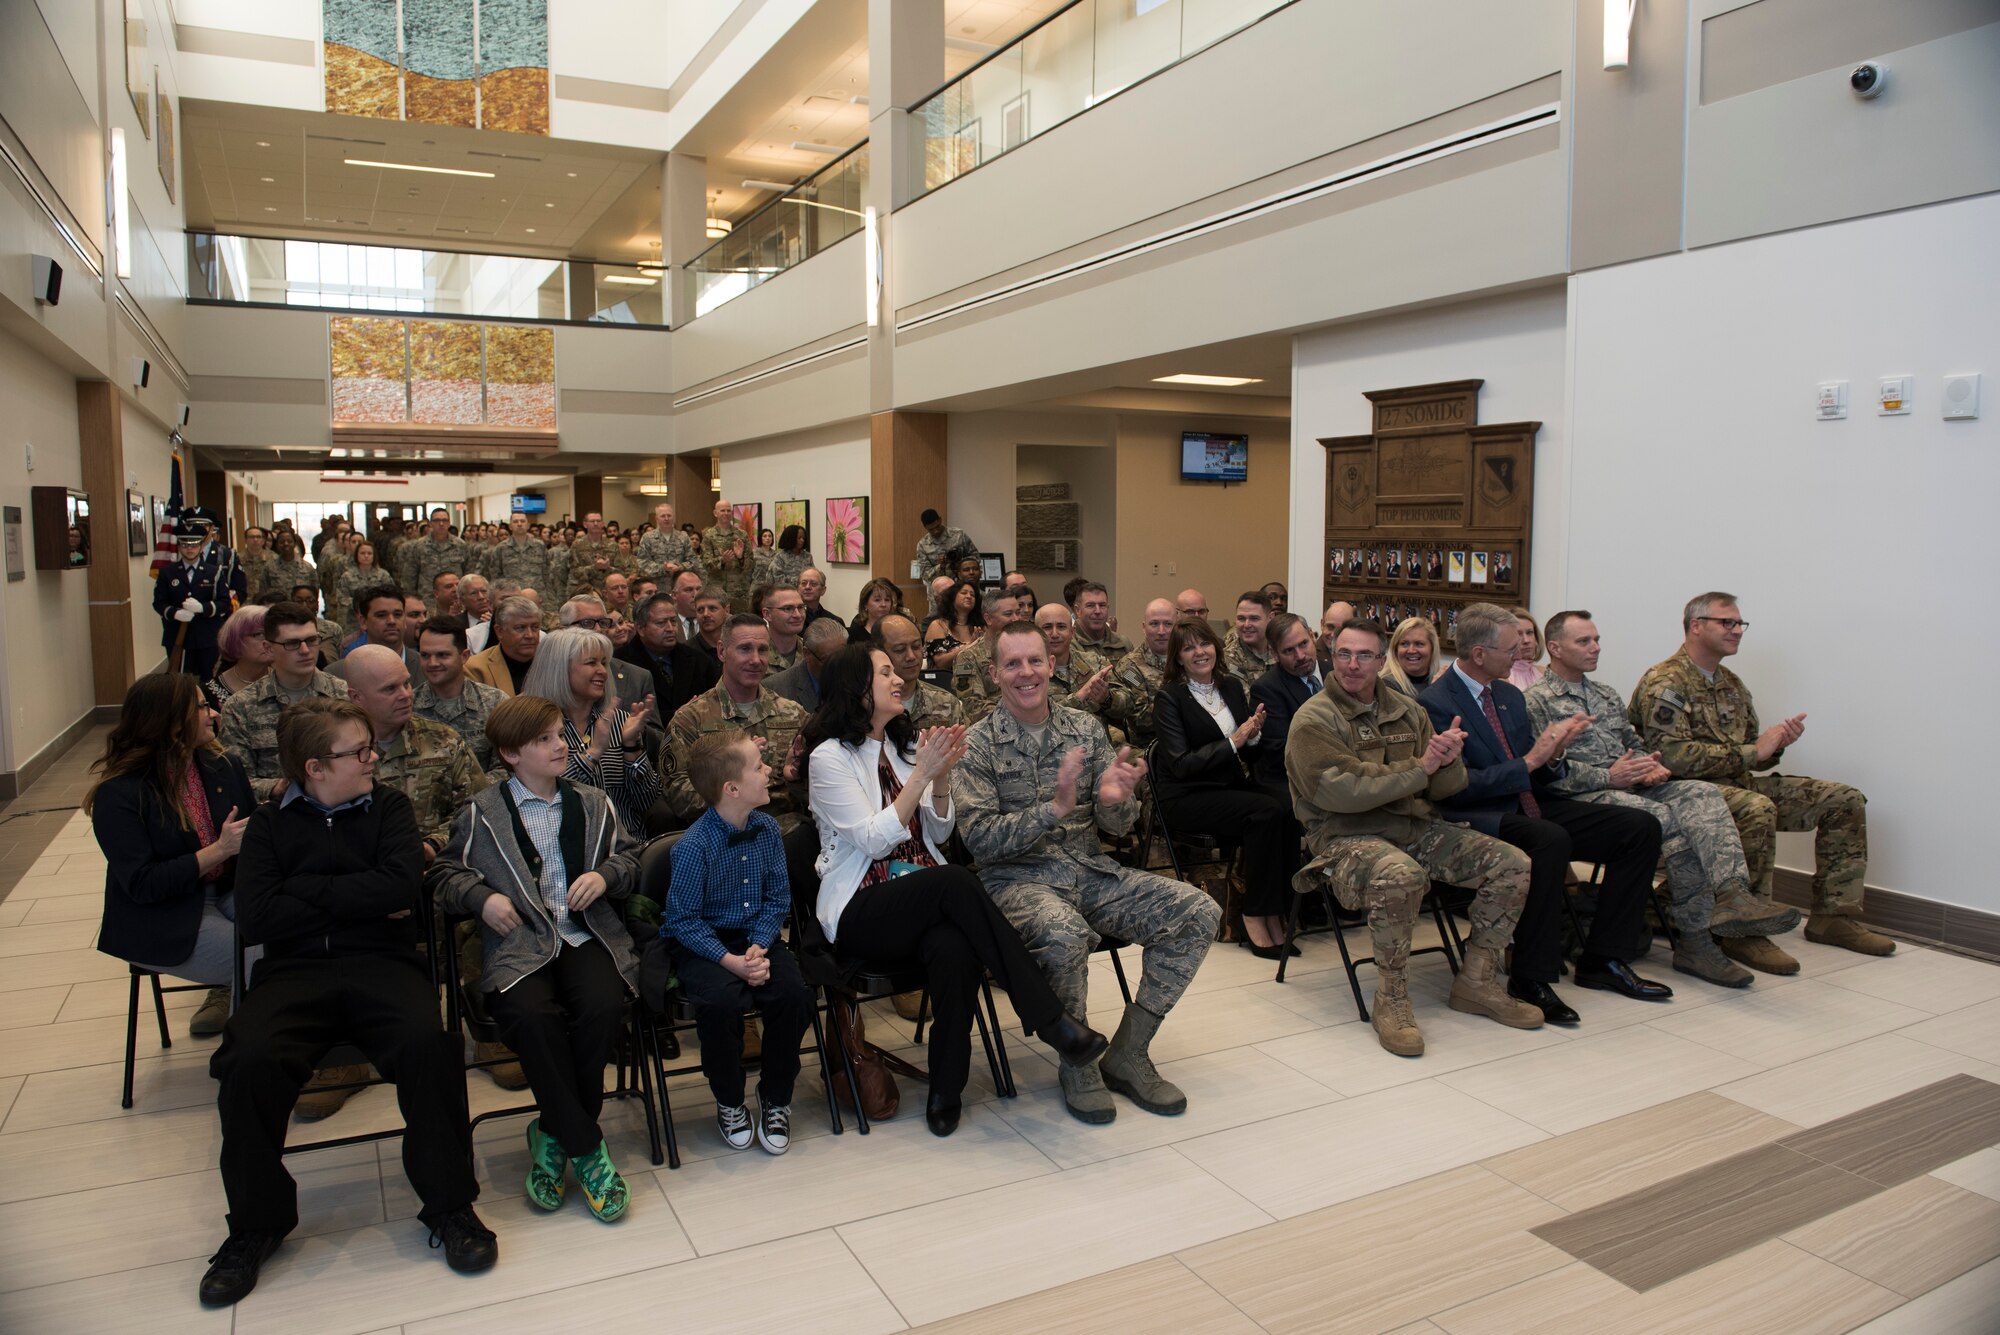 Military members and civilians applaud during the 27th Special Operations Medical Group building ribbon cutting ceremony at Cannon Air Force Base, N.M., Feb. 23, 2018. This upgrade has been planned for the last few years. The ground-breaking ceremony was July of 2015 and now, nearly three years later, the building complete and open for patients. (U.S. Air Force photo by Staff Sgt. Michael Washburn/Released)